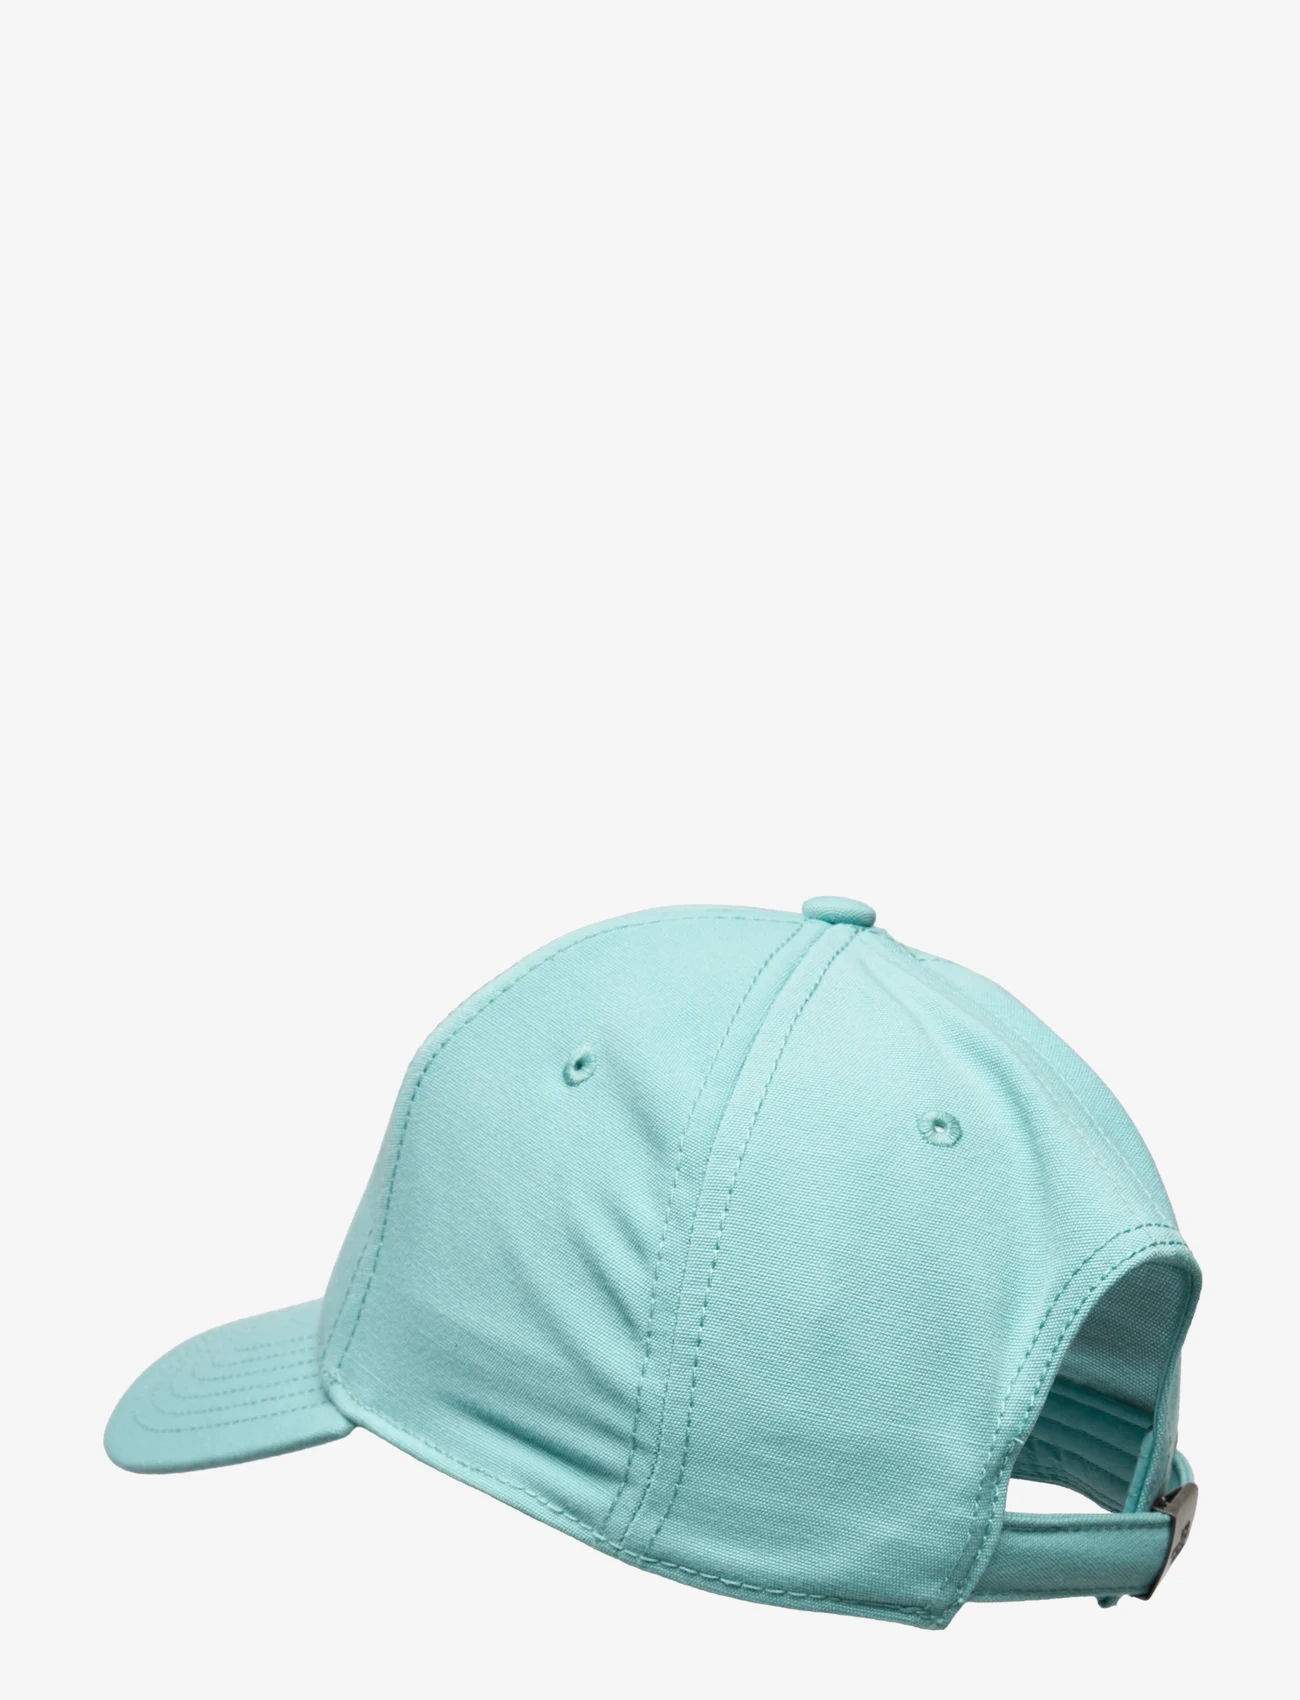 The North Face - RECYCLED 66 CLASSIC HAT - laagste prijzen - reef waters - 1